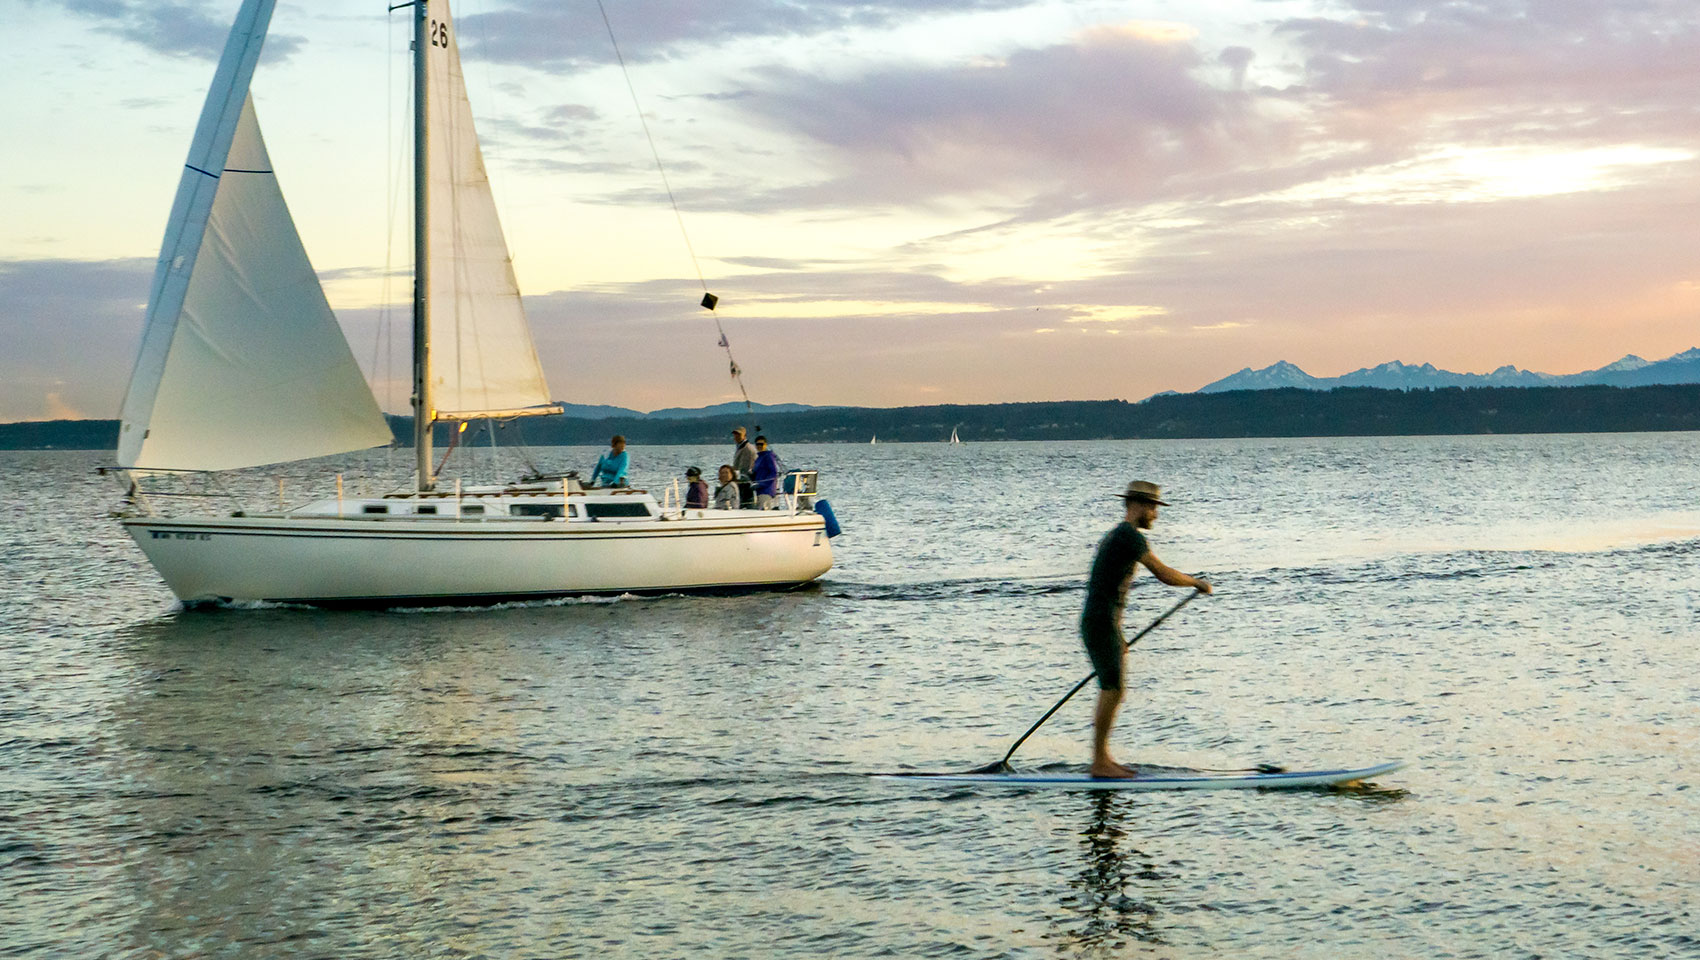 man paddle boarding on the water with a sailboat in the background